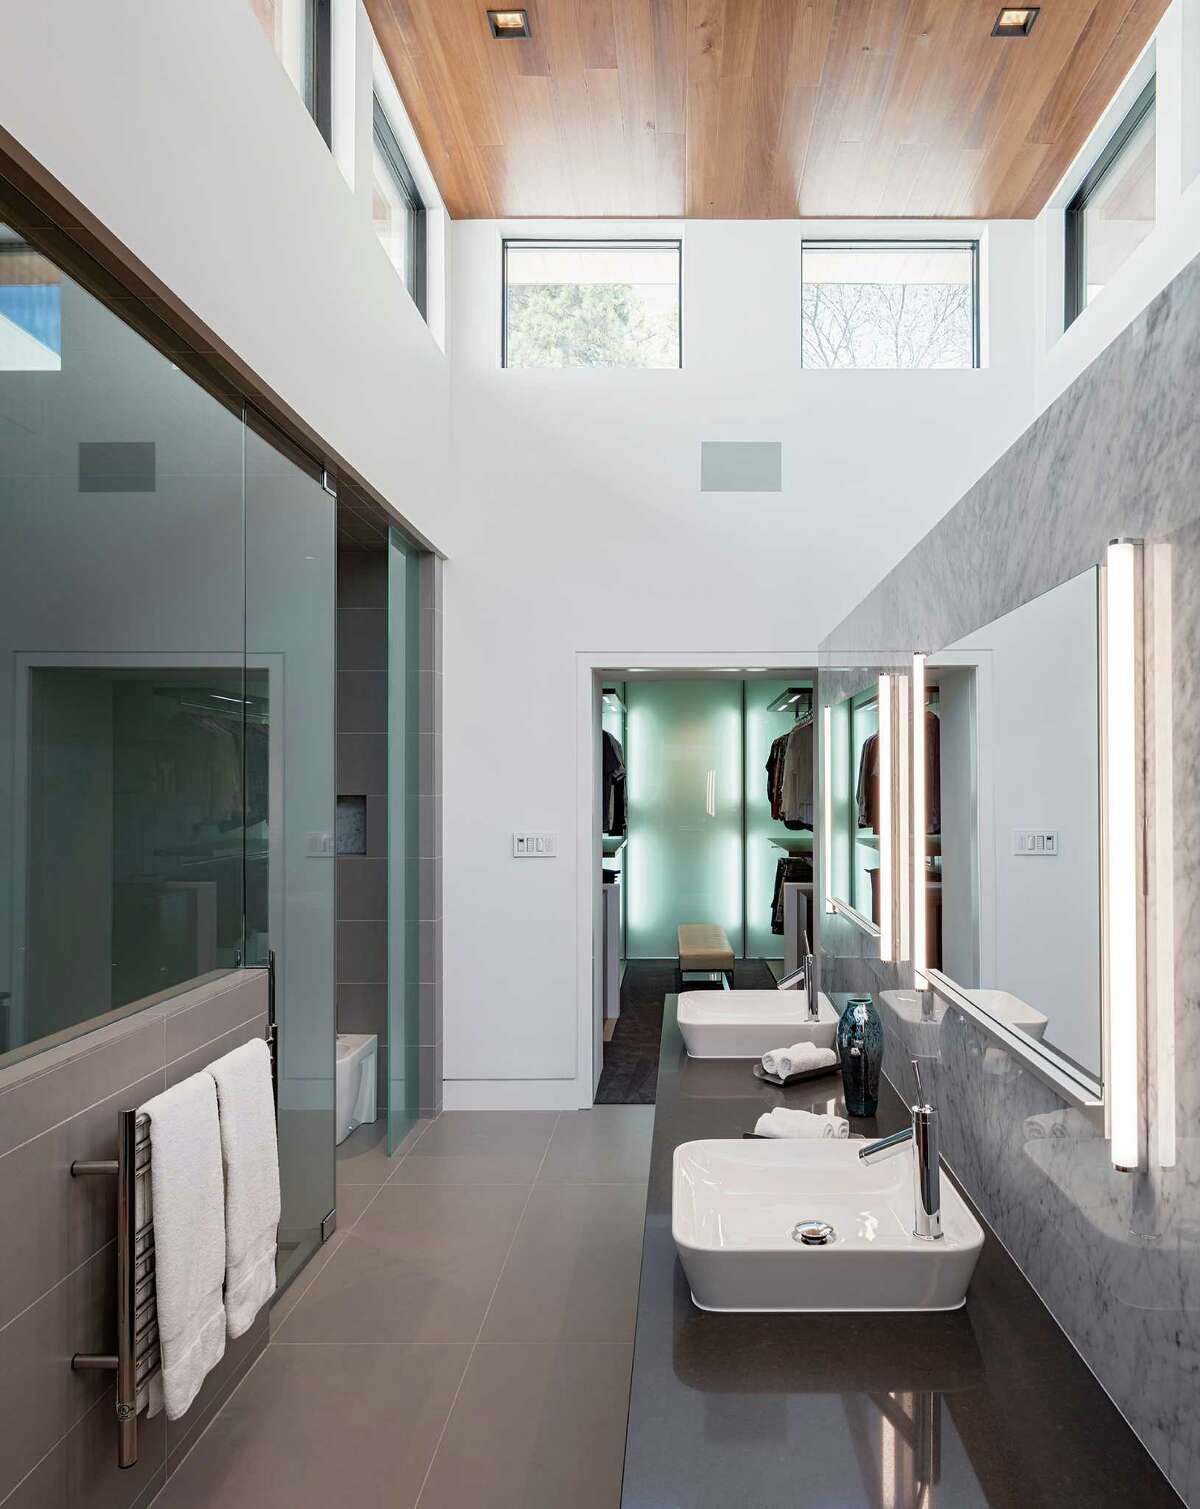 Clerestory windows bring natural light into the master bathroom designed by Messick.